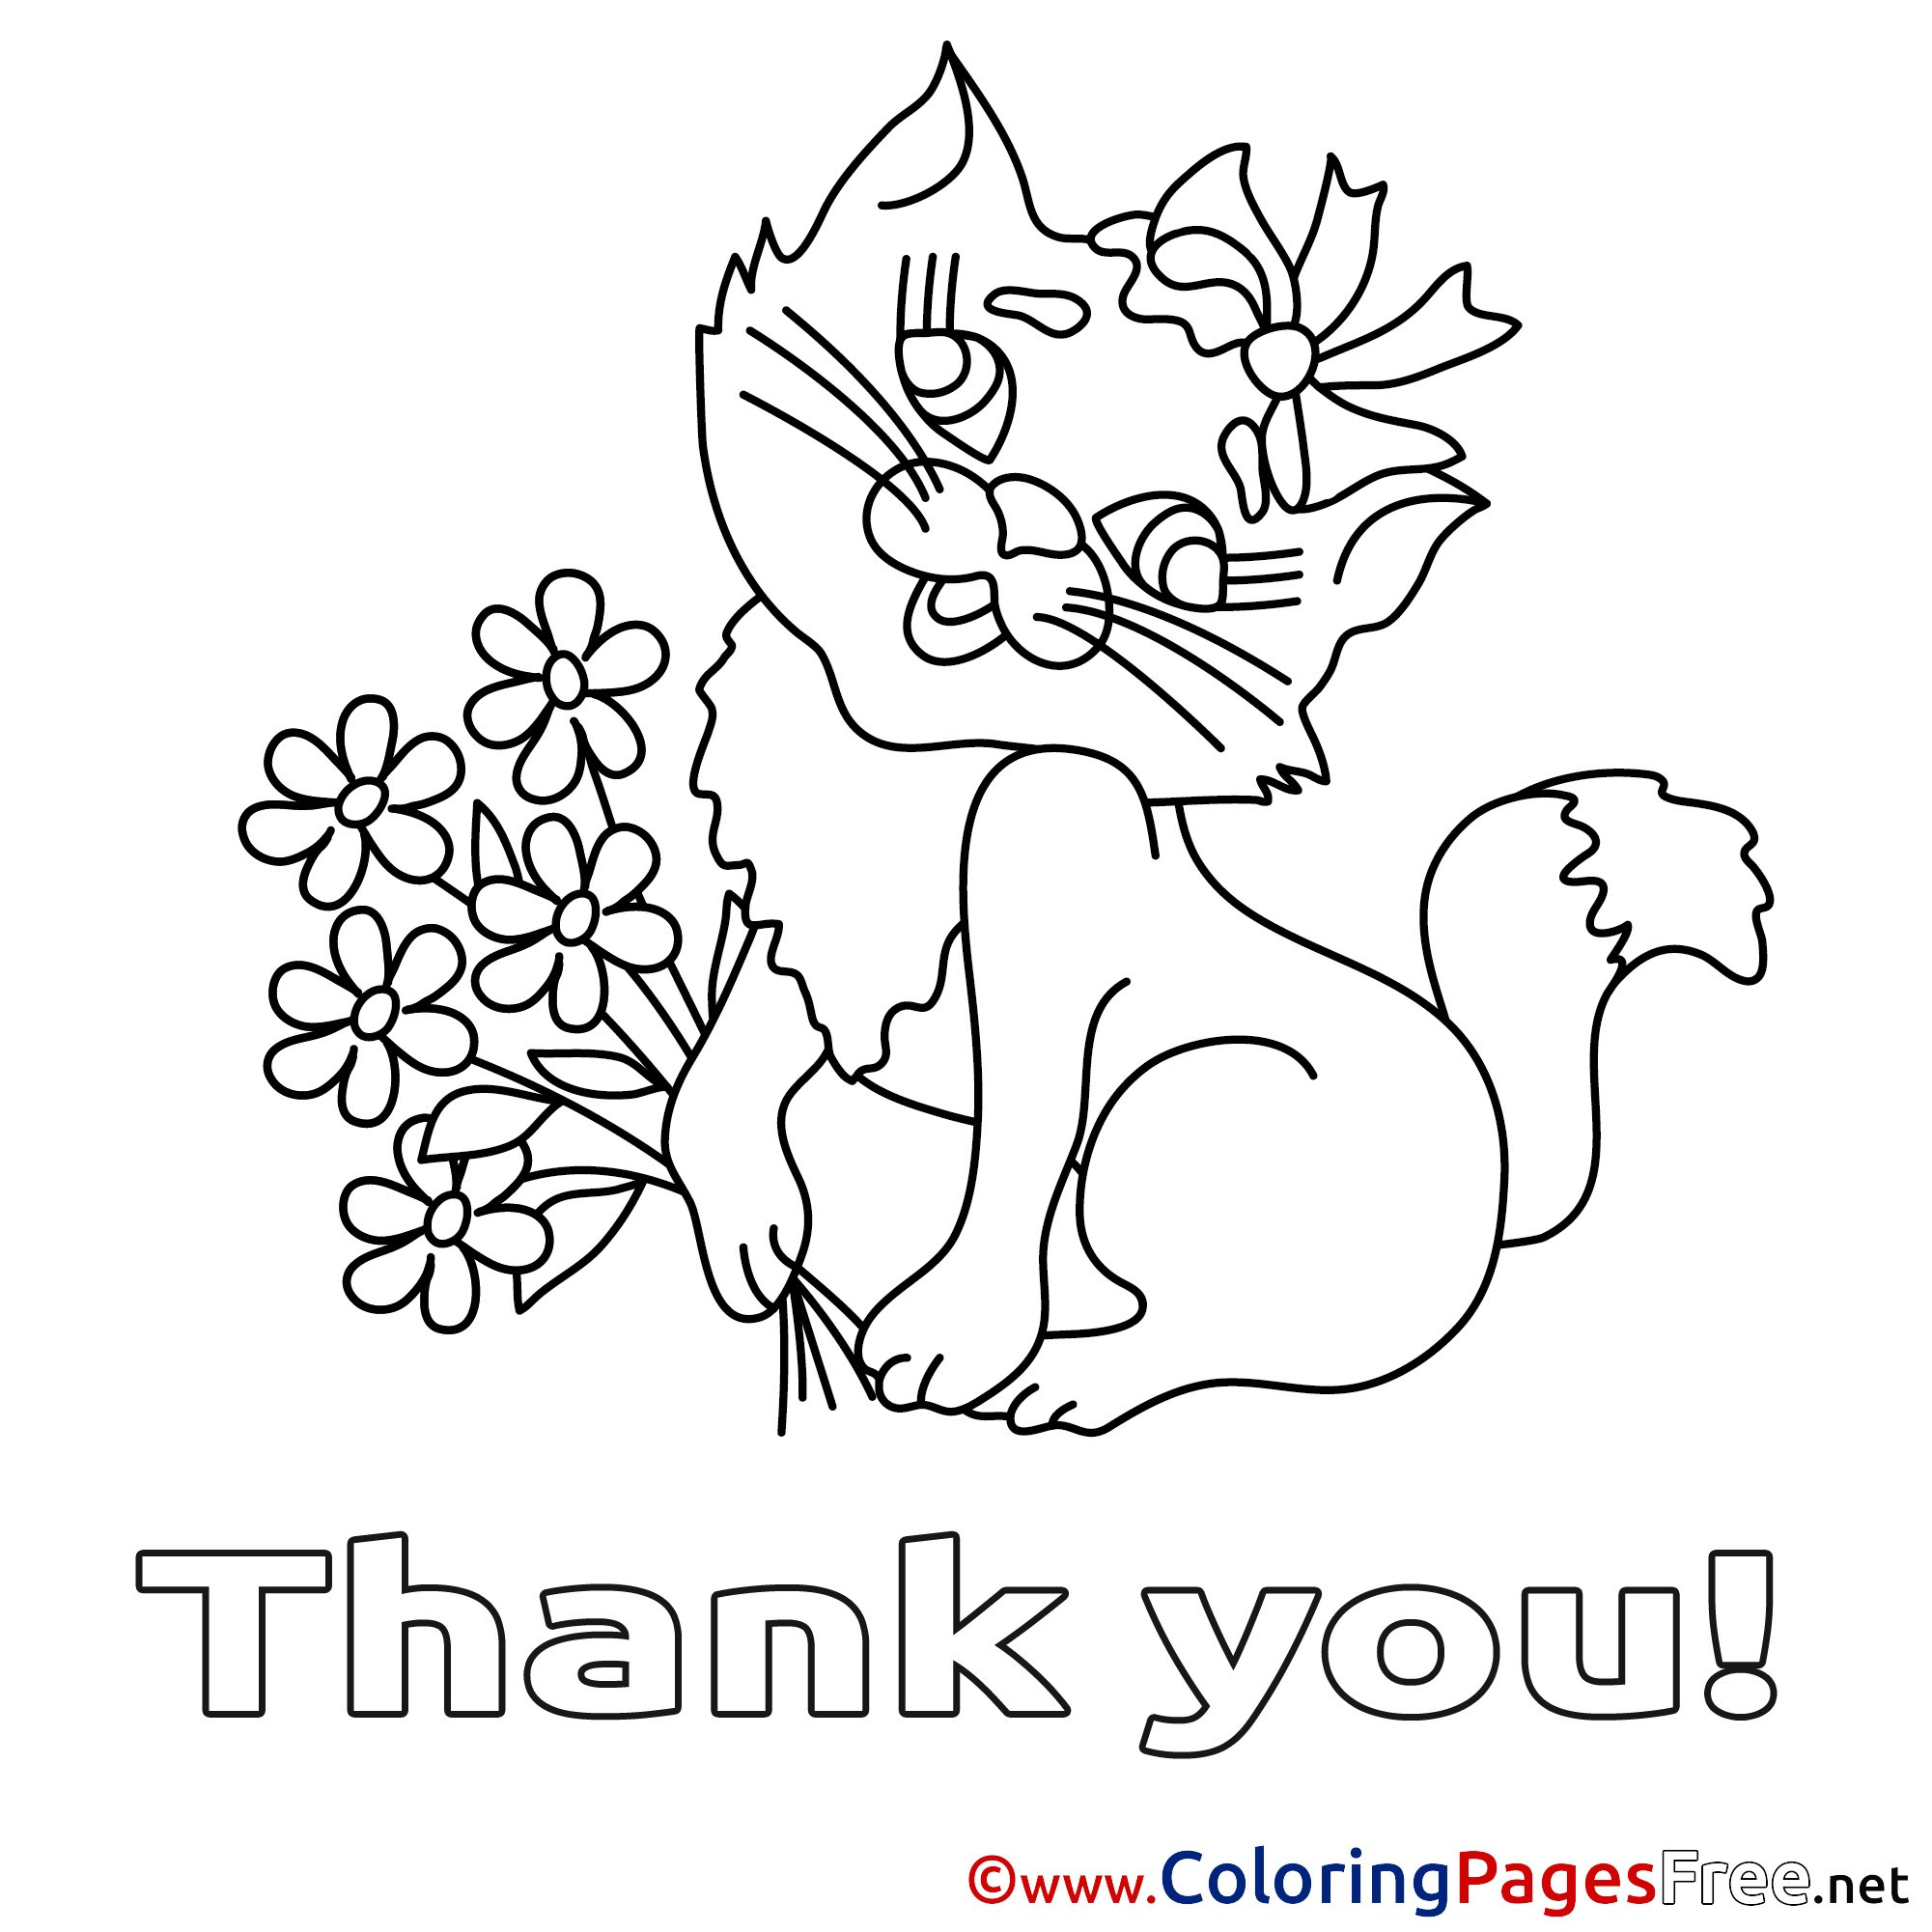 Thank You Coloring Pages Printable / Thank You Coloring Pages For Kids